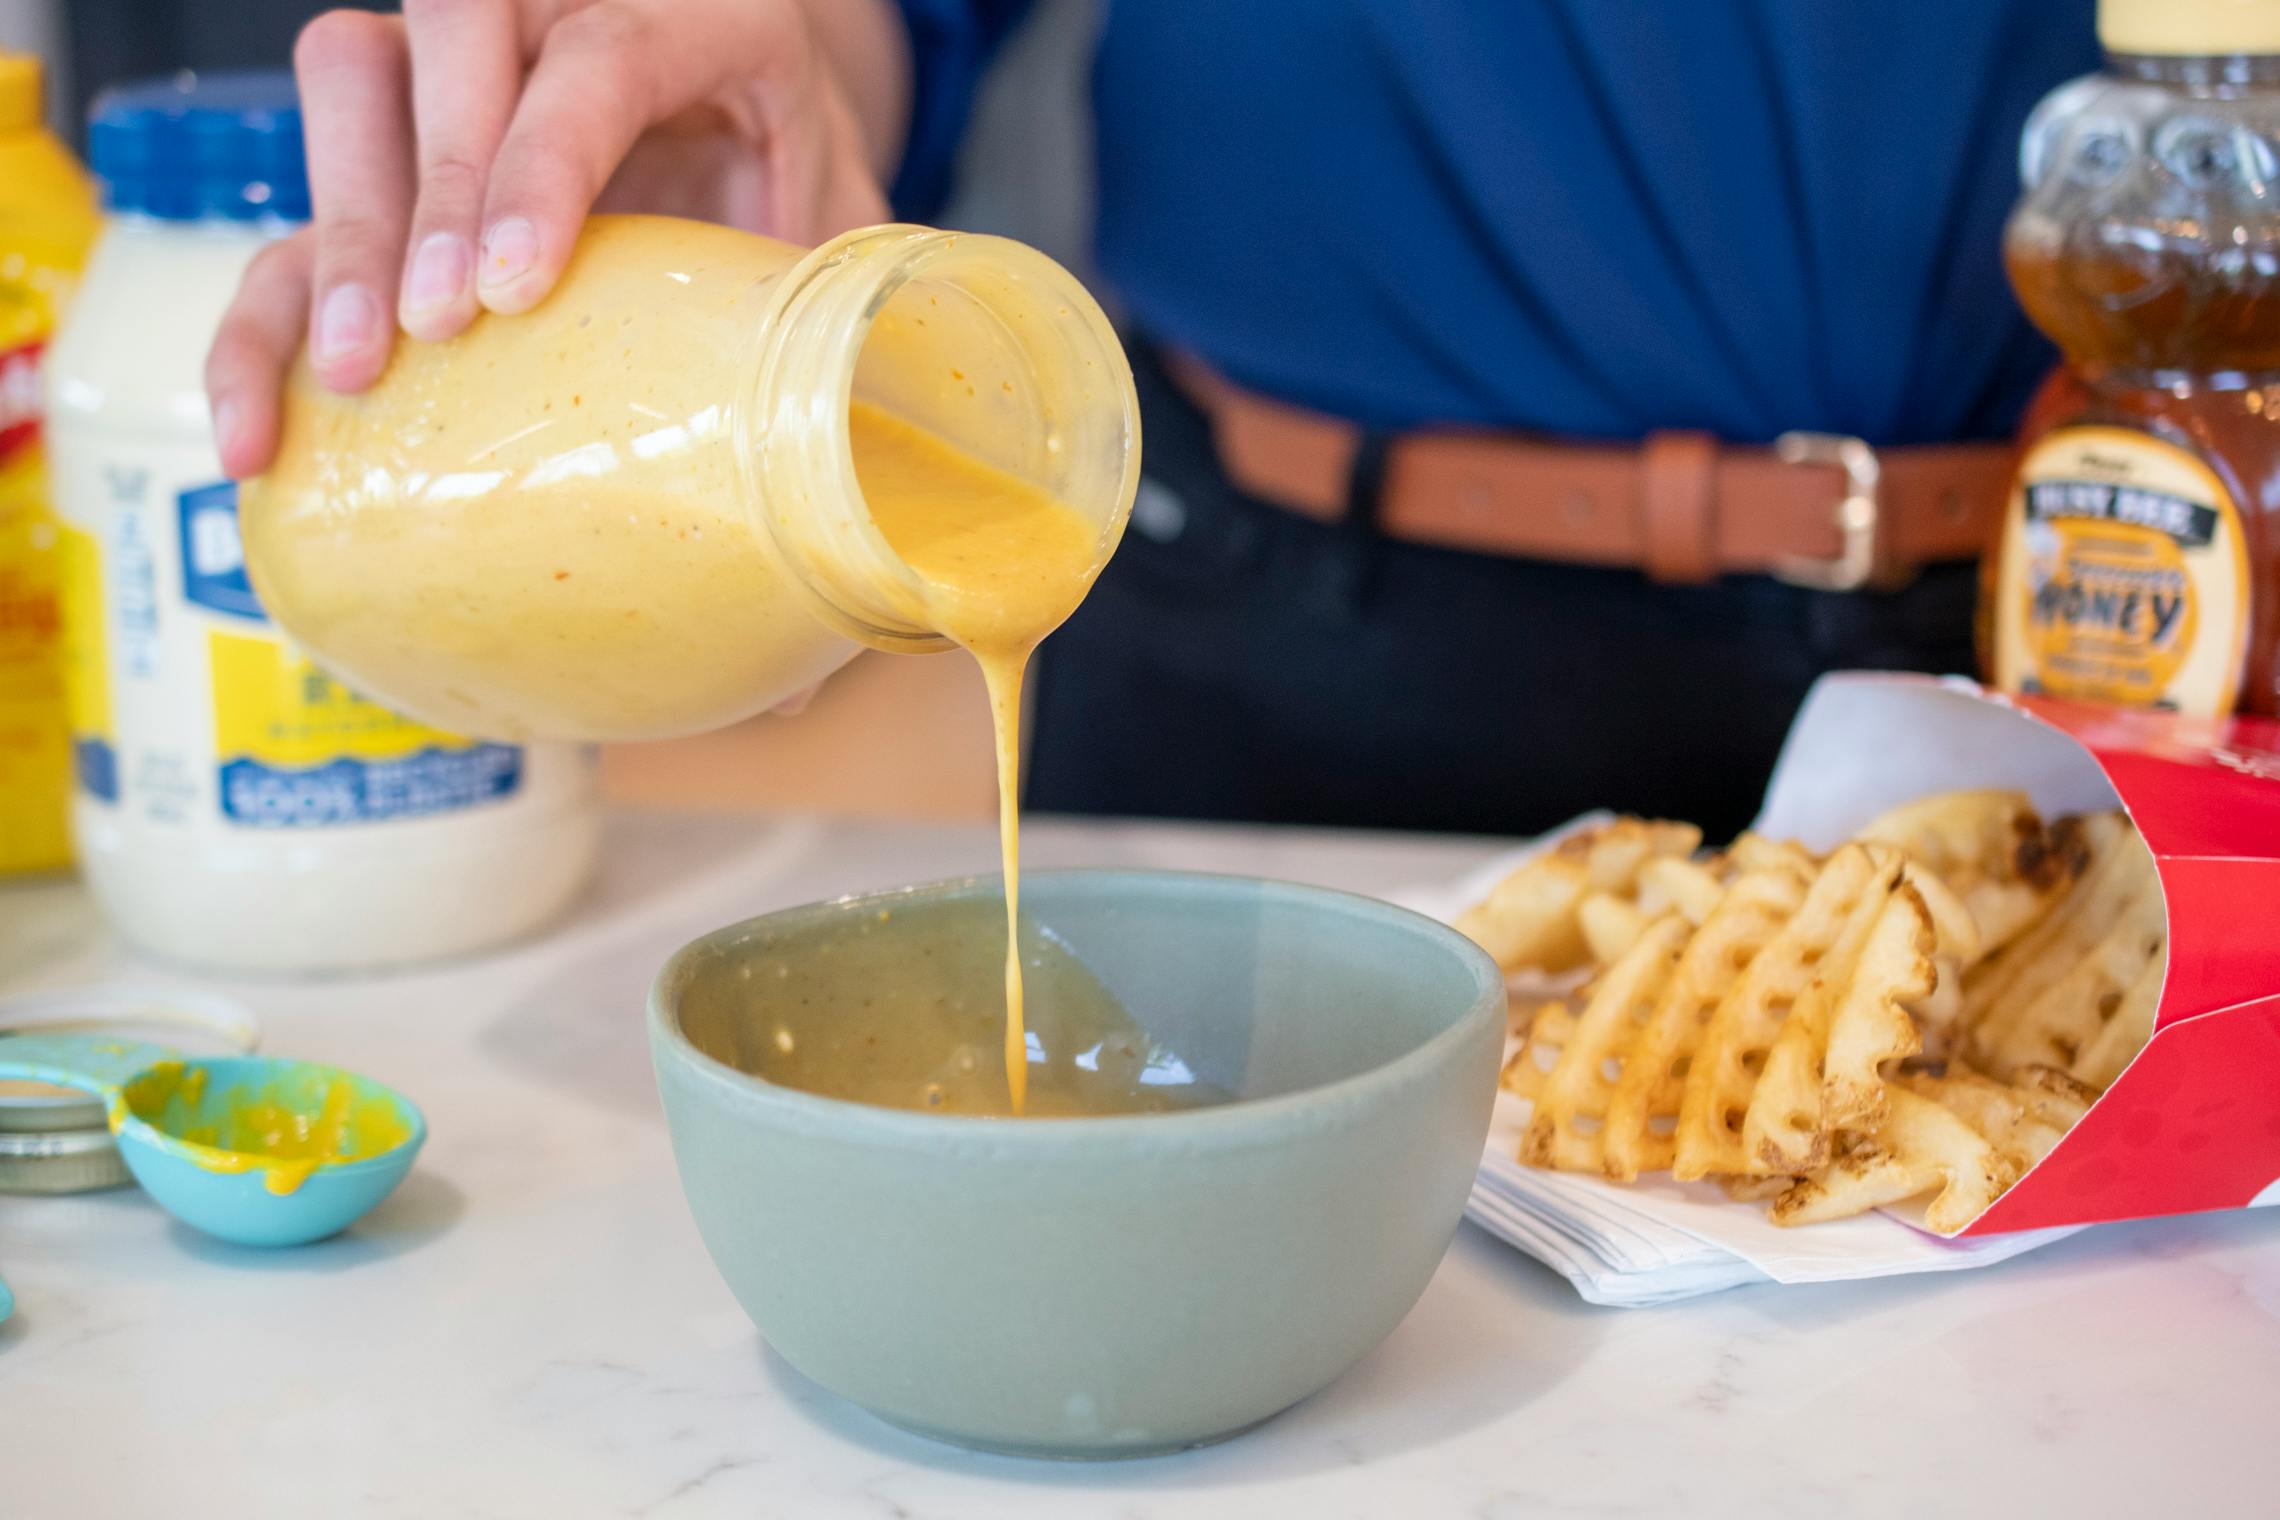 Homemade chick-fil-a sauce being poured from a glass bottle into a bowl on a table next to Chick-fil-A waffle fries and sauce ingredients.